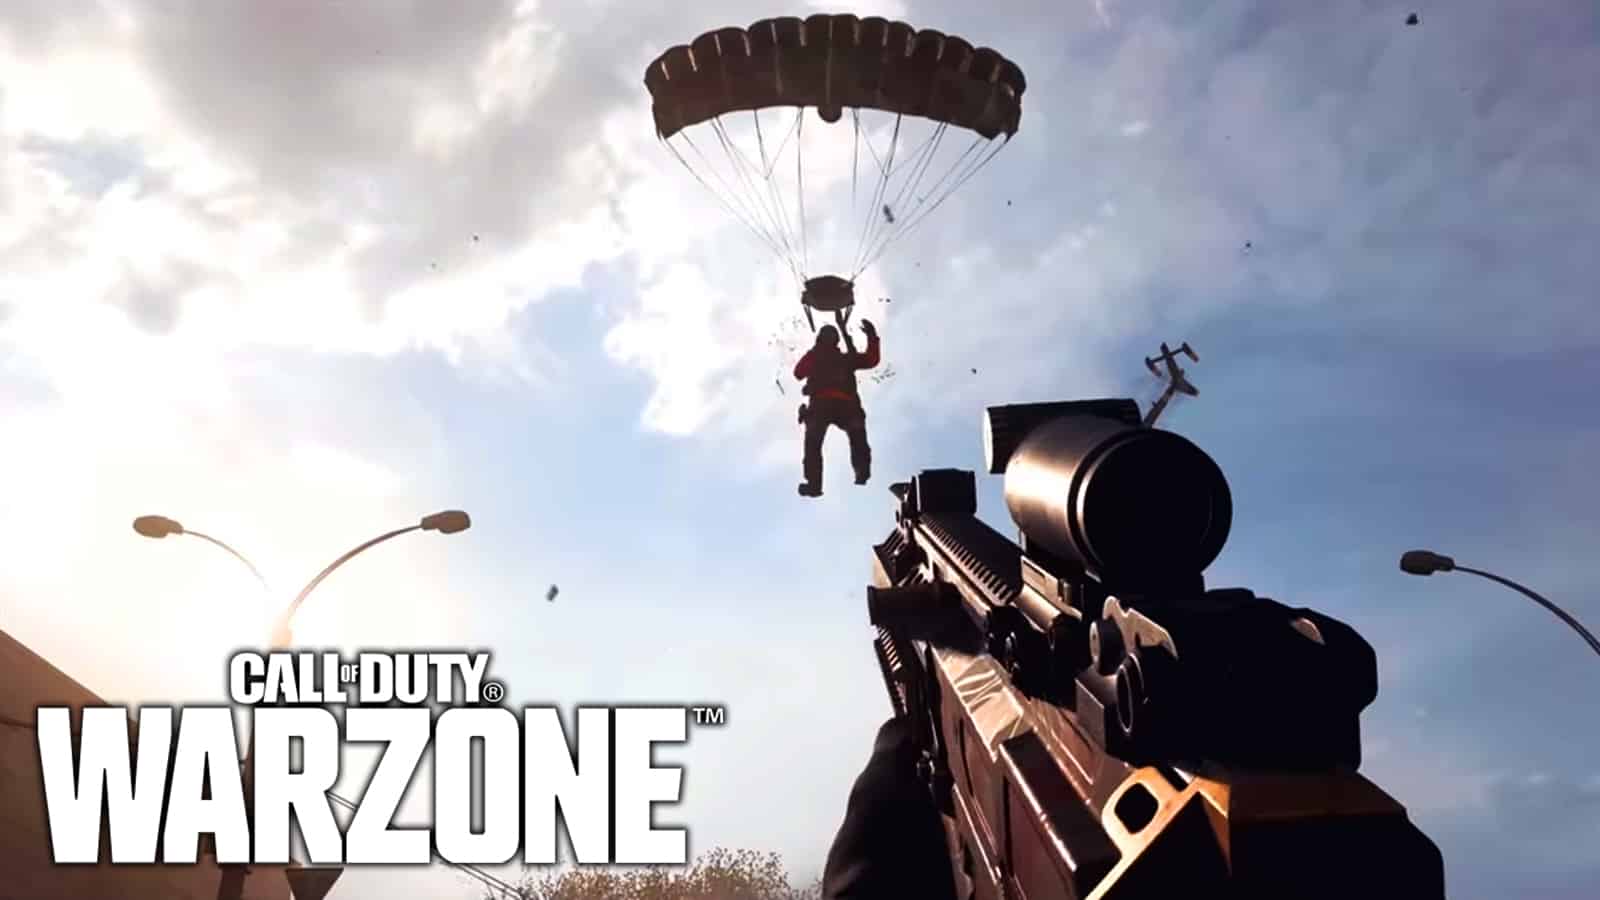 An image of Parachutes in Warzone